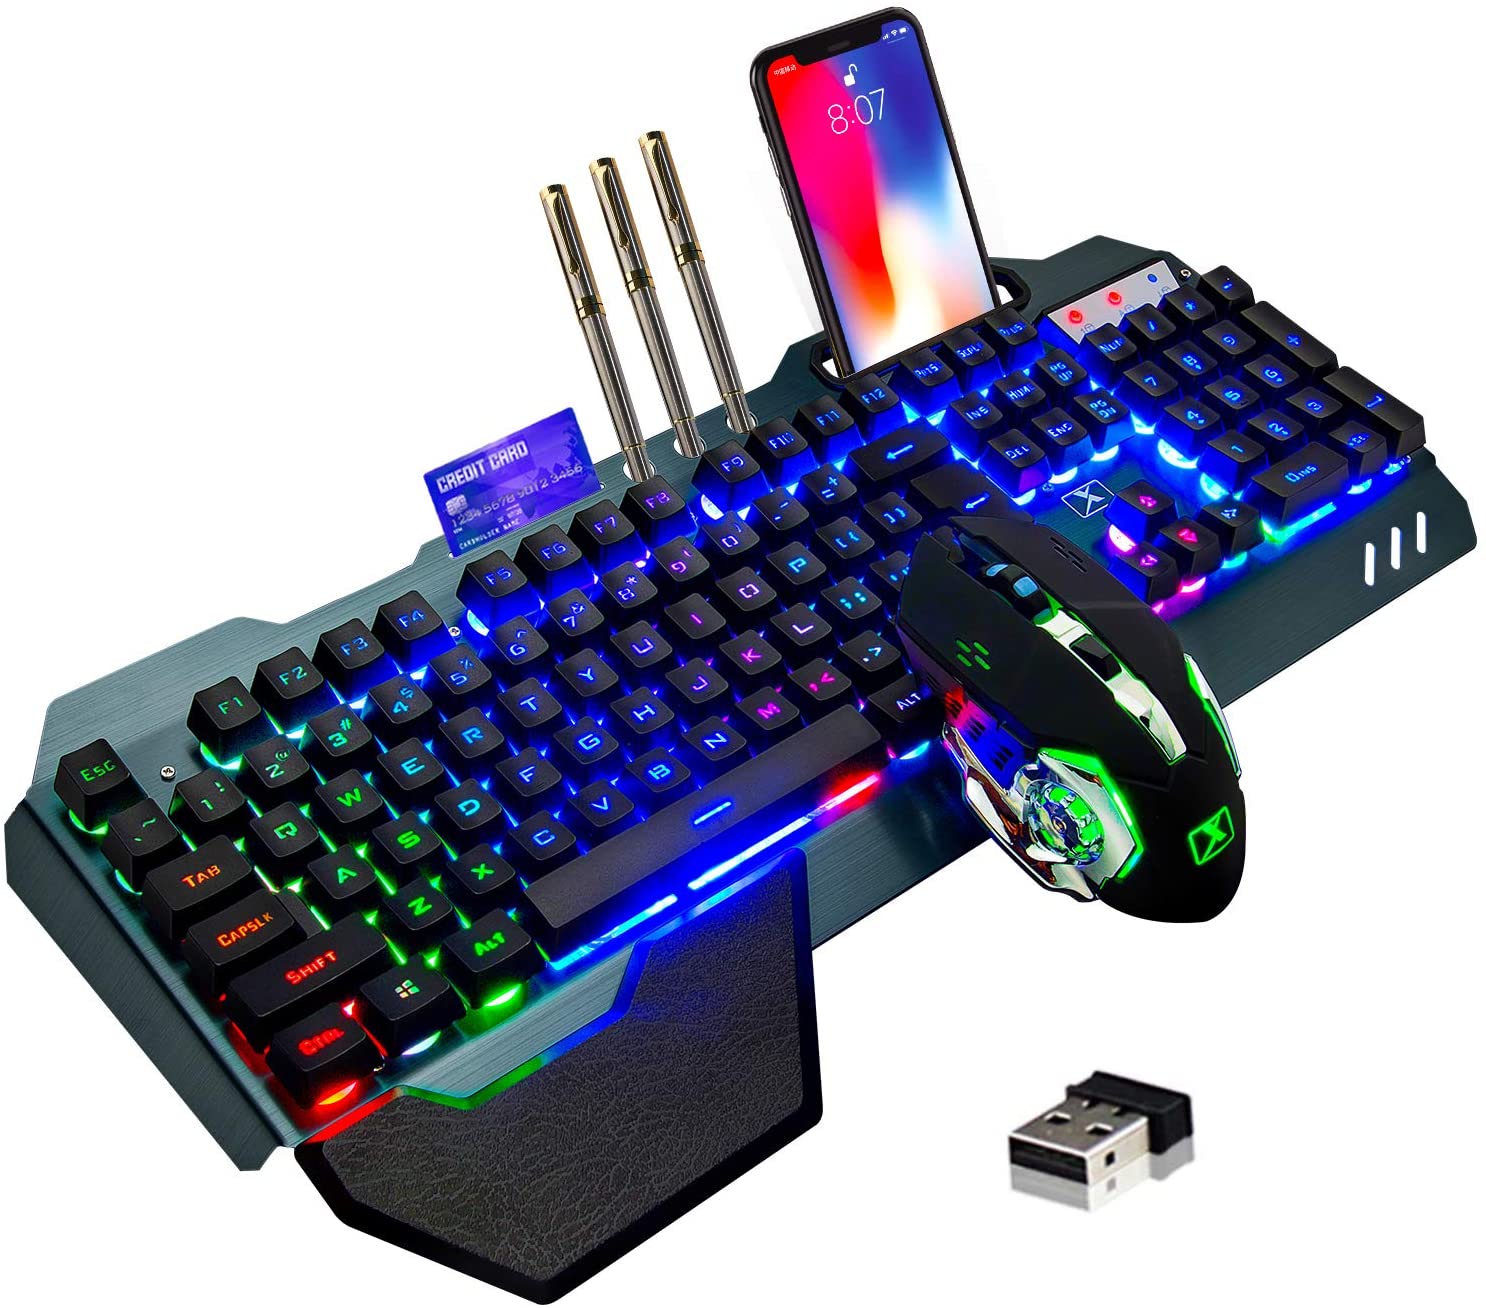 9. LexonElec Wireless Gaming Keyboard and Mouse